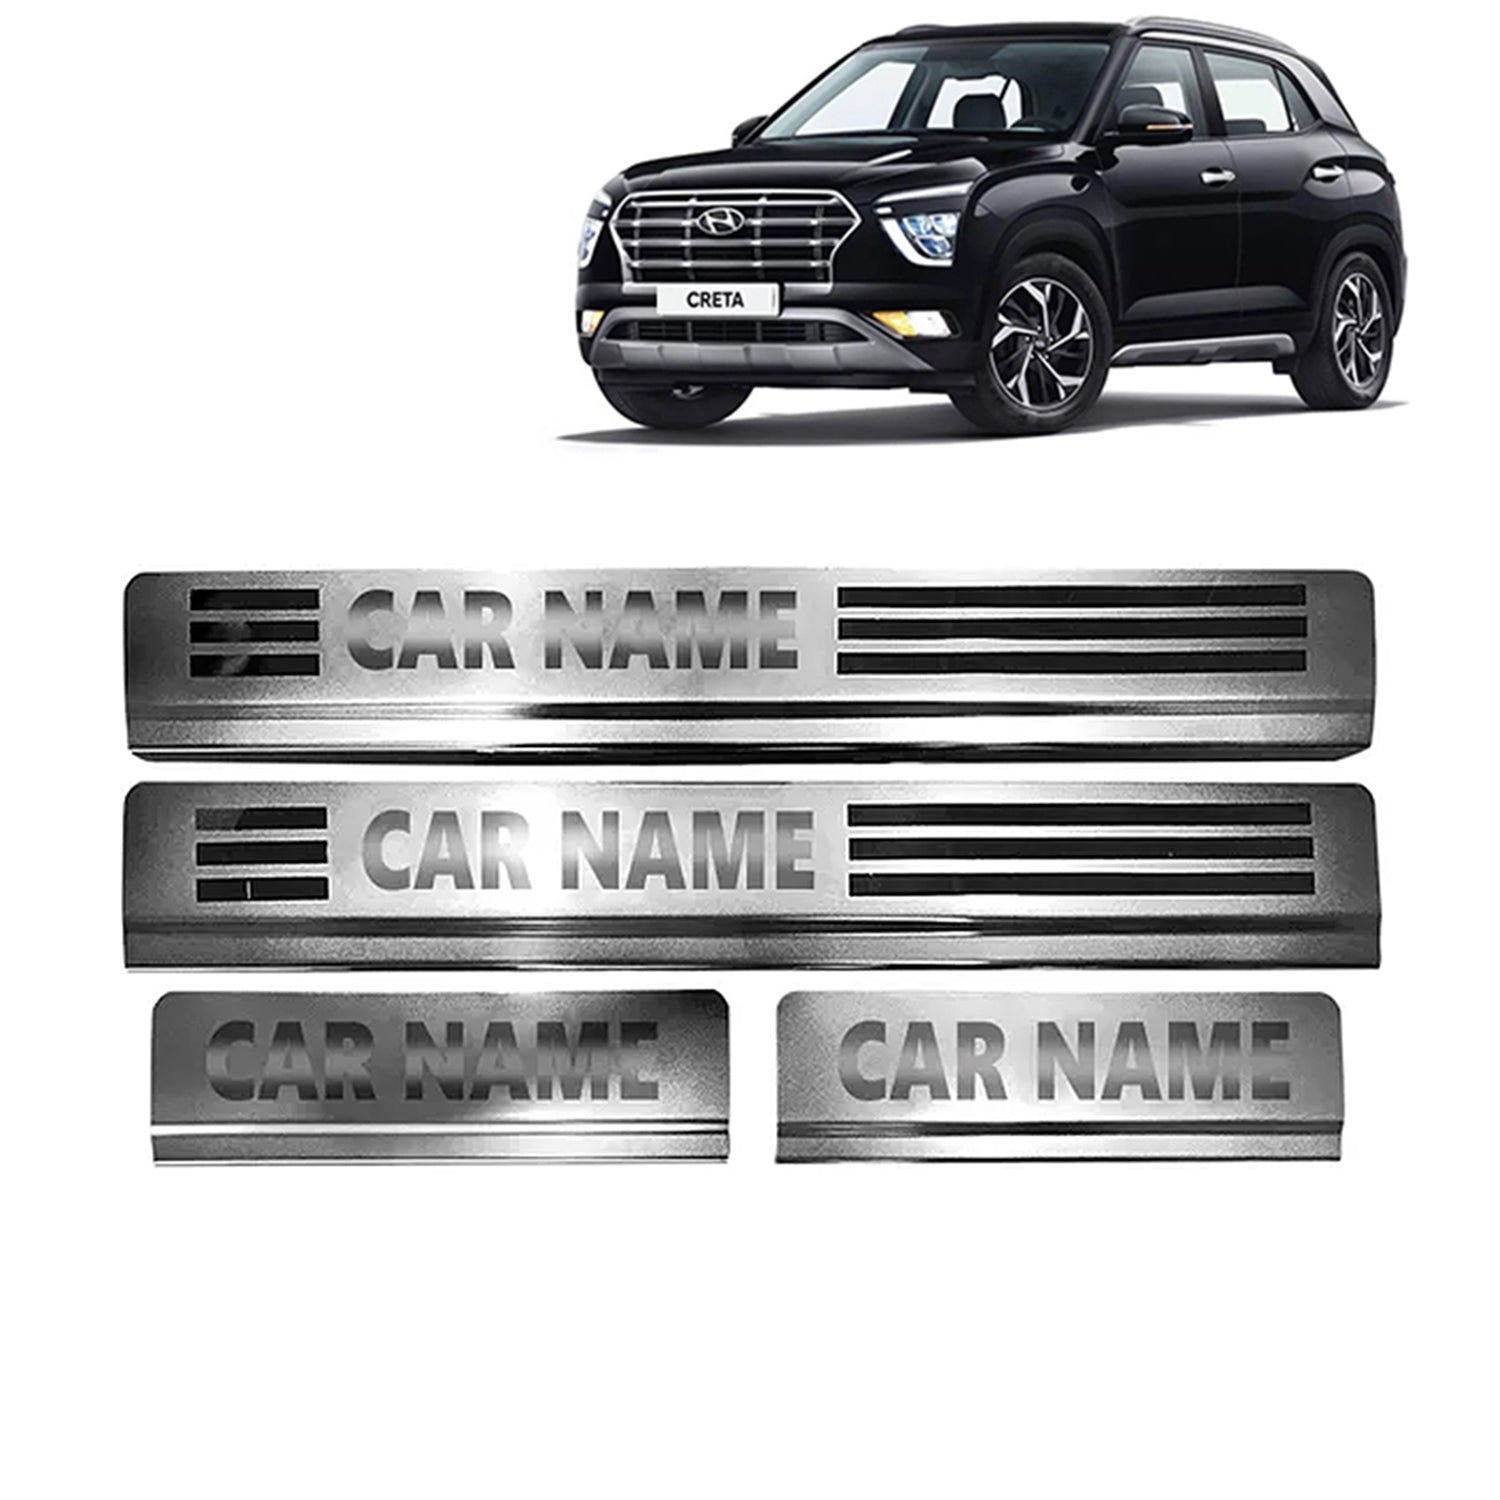 Kingsway Car Step Sill Plates for Hyundai Creta 2020 Onwards Model,  Stainless Steel Car Foot Step Protector Scuff Plates, Color : Silver, Set  of 4 Piece : : Car & Motorbike